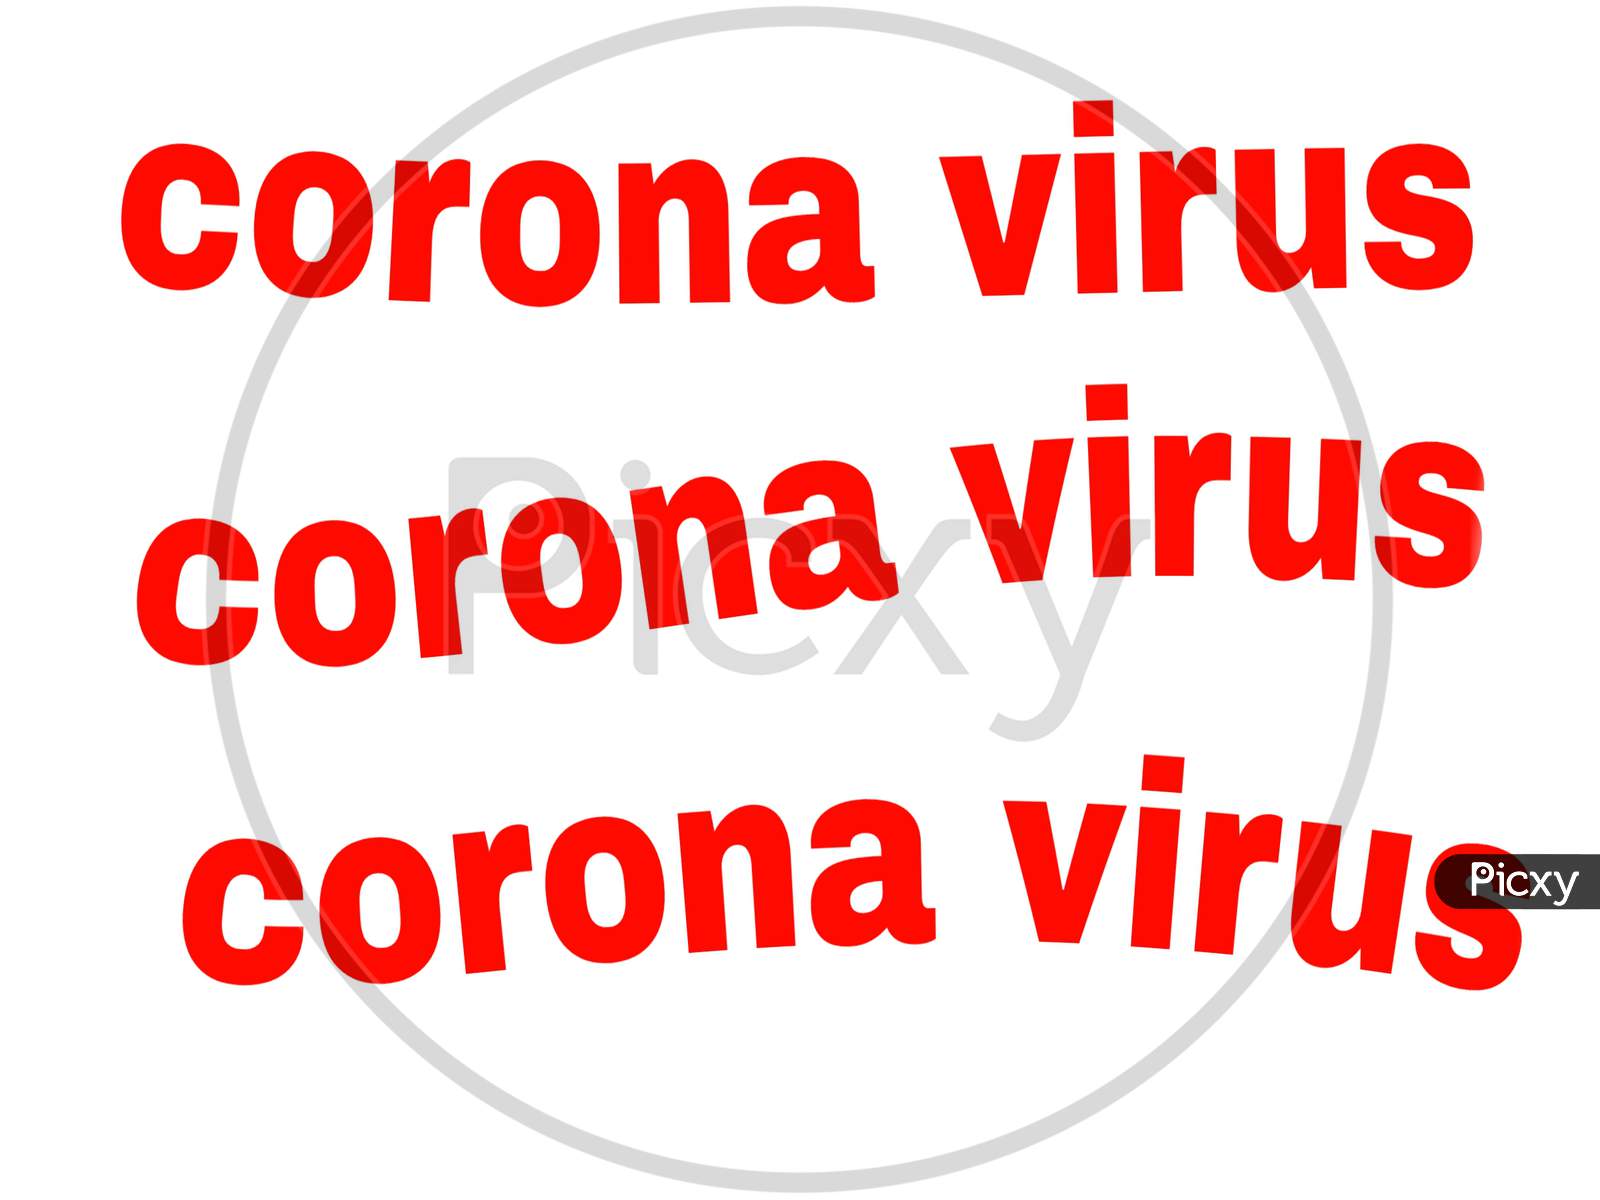 Corona virus name in red color bold font.